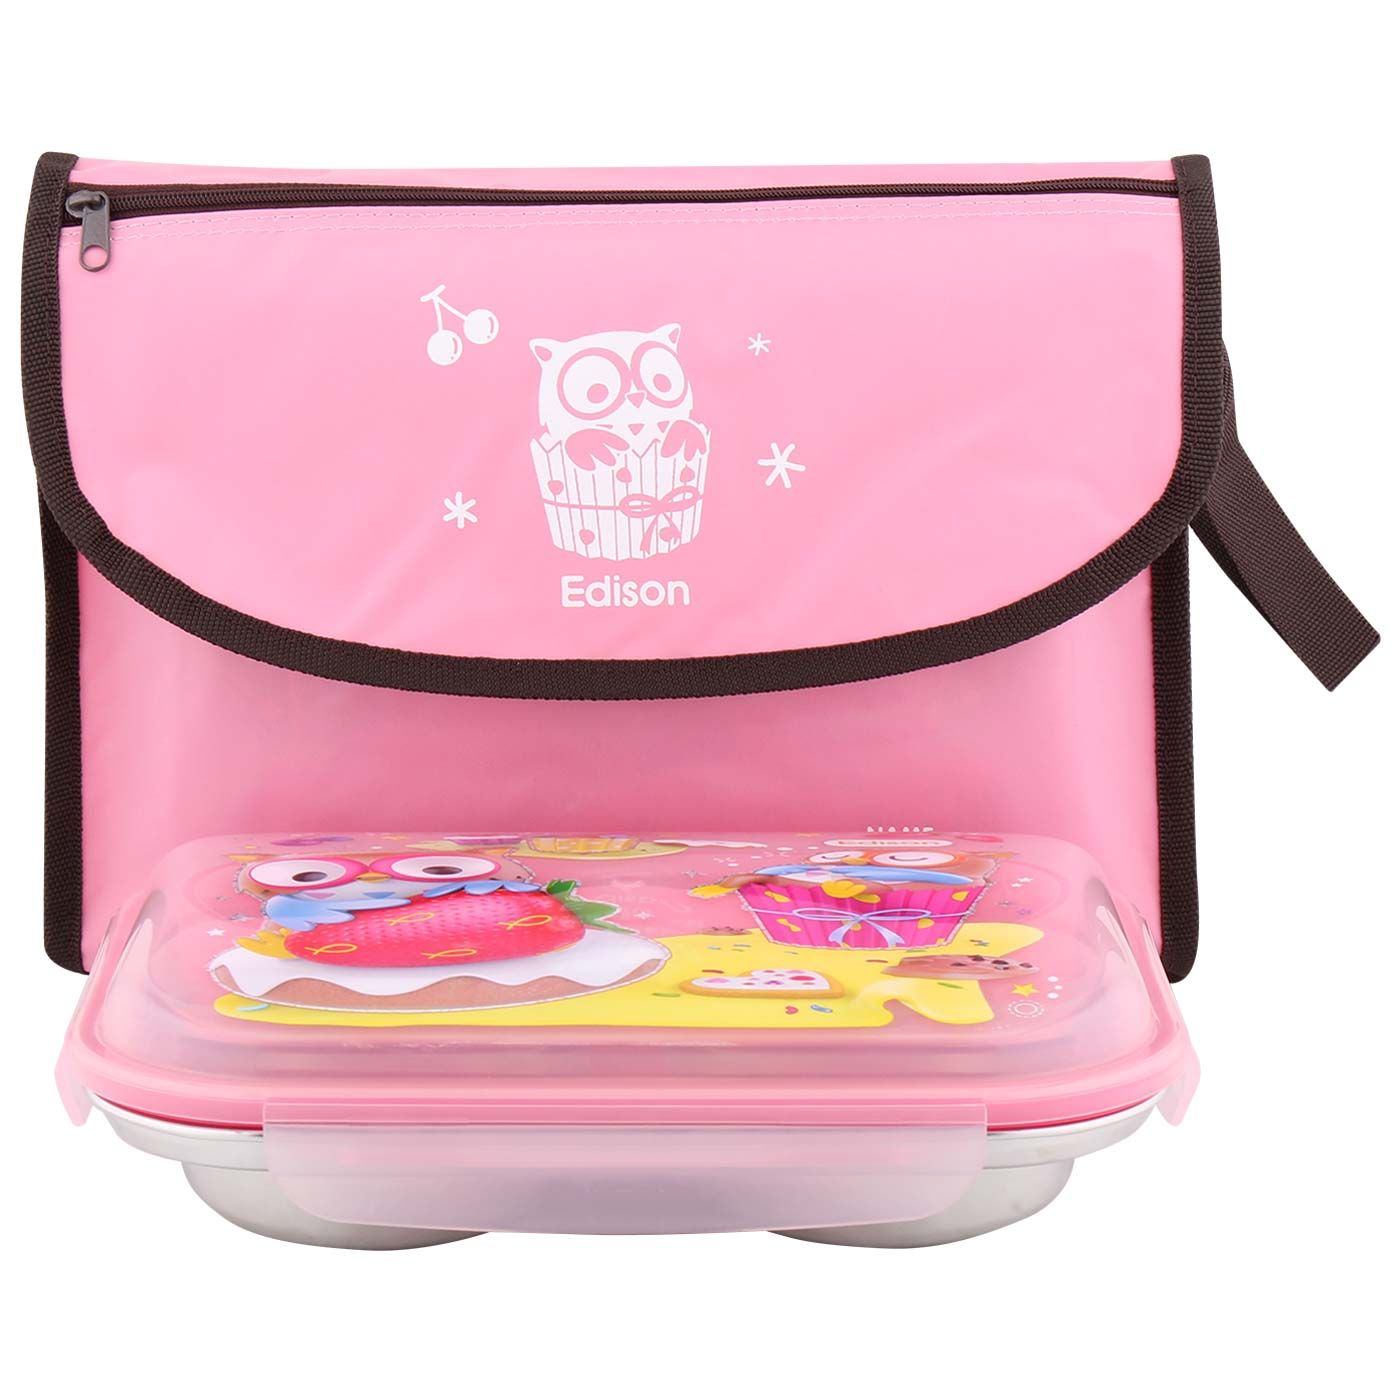 Edison Stainless Lunch Box With Pouch Pink - 1